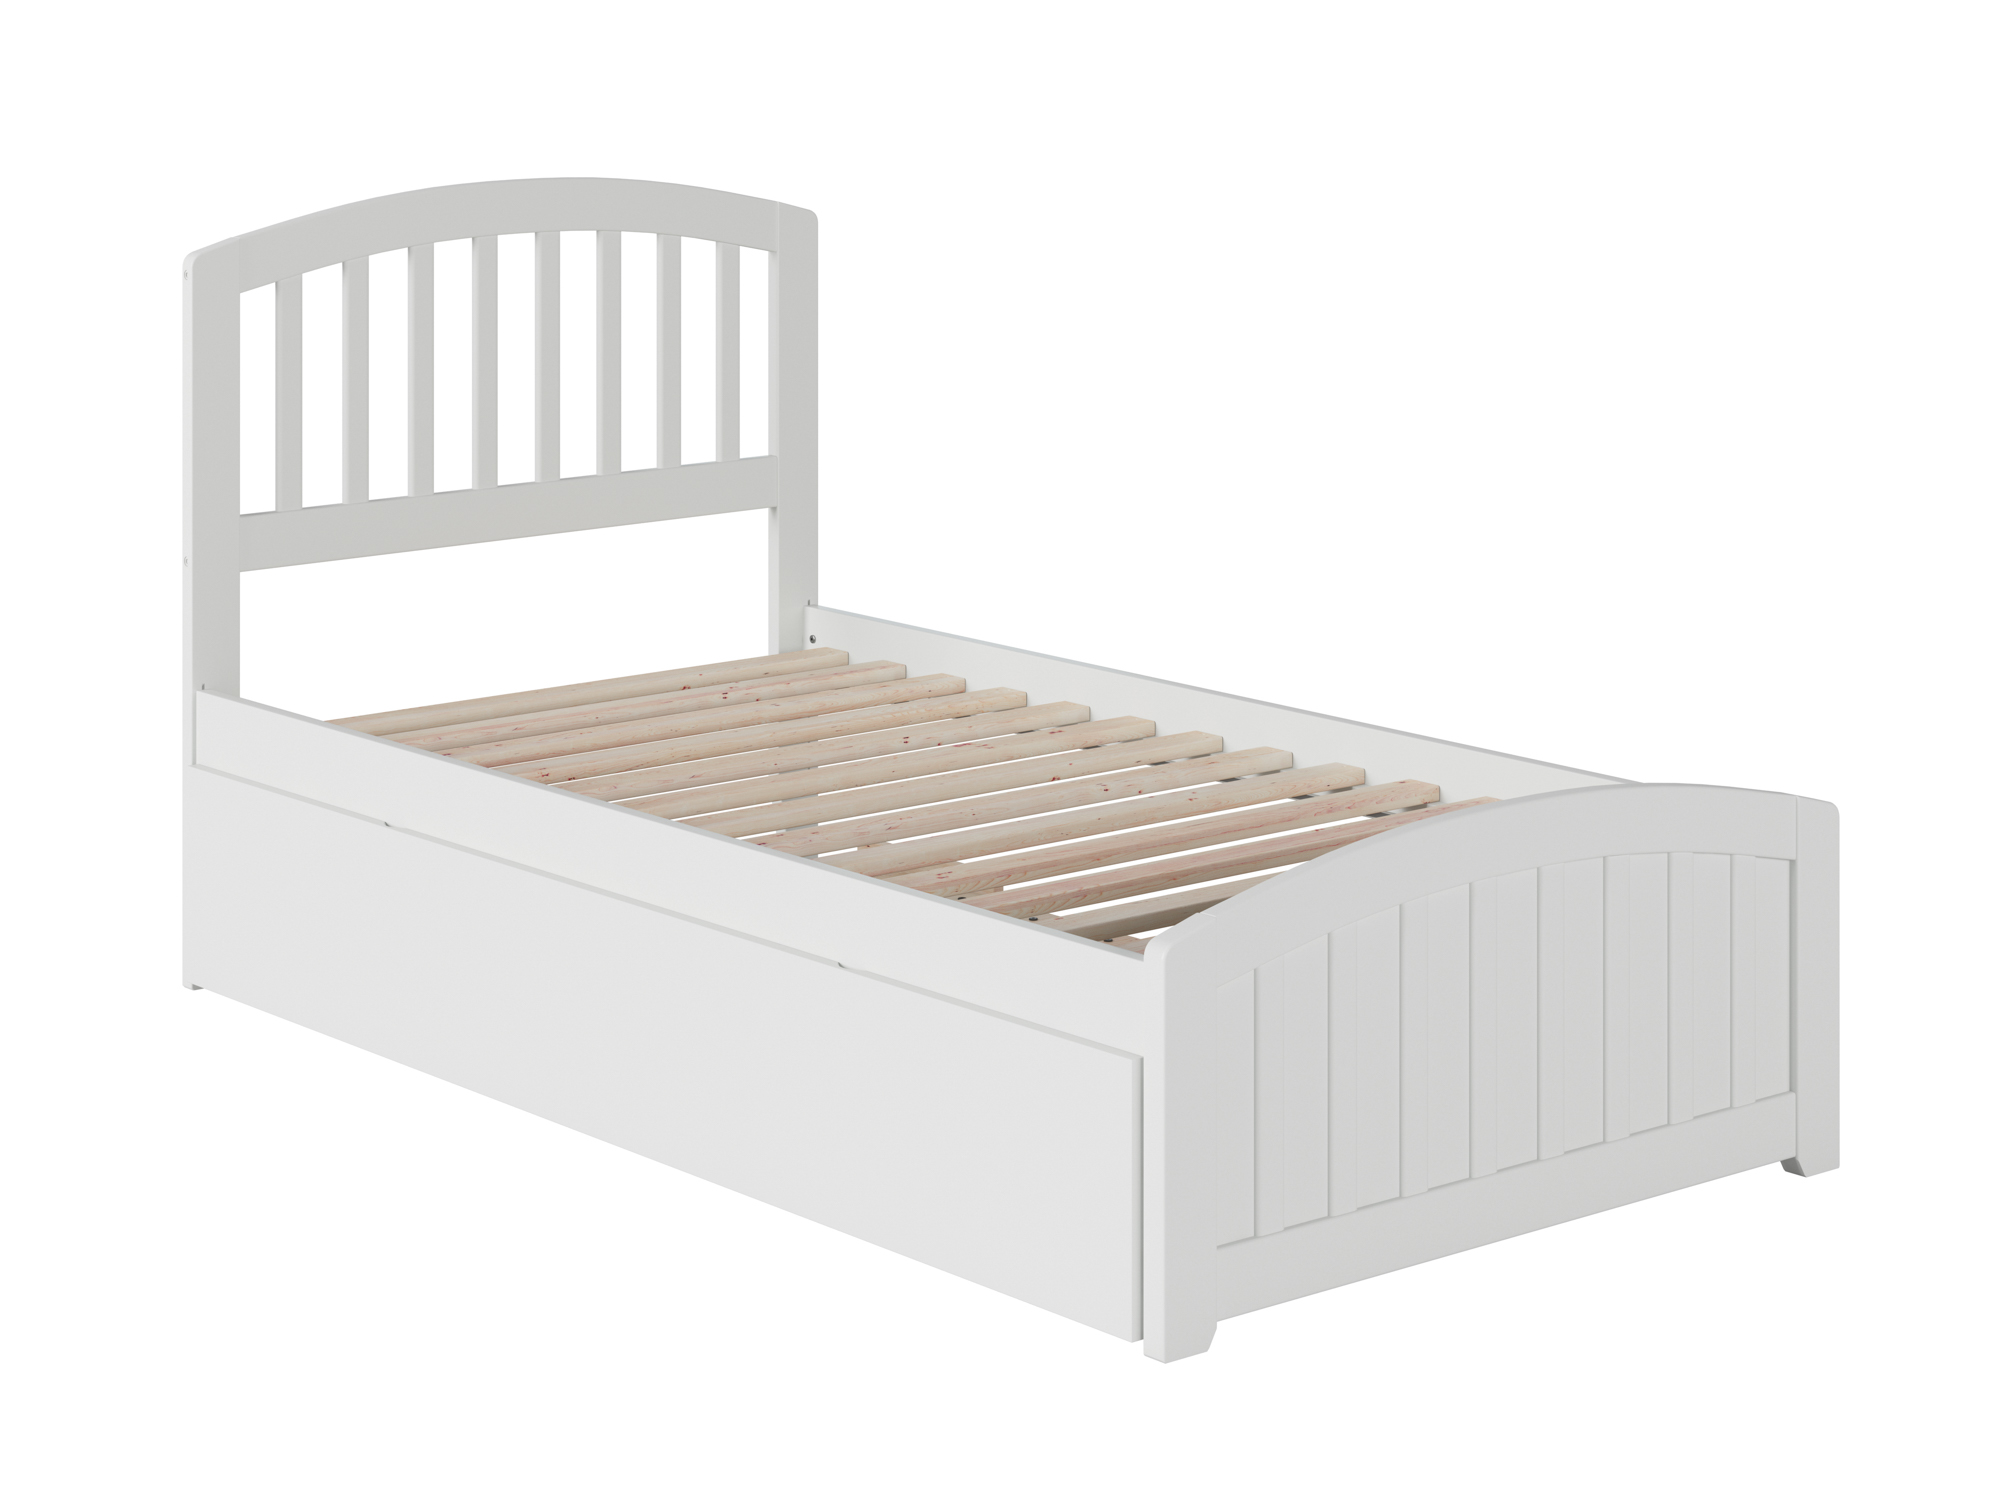 Richmond Twin Extra Long Bed with Matching Footboard and Twin Extra Long Trundle in White - image 1 of 6